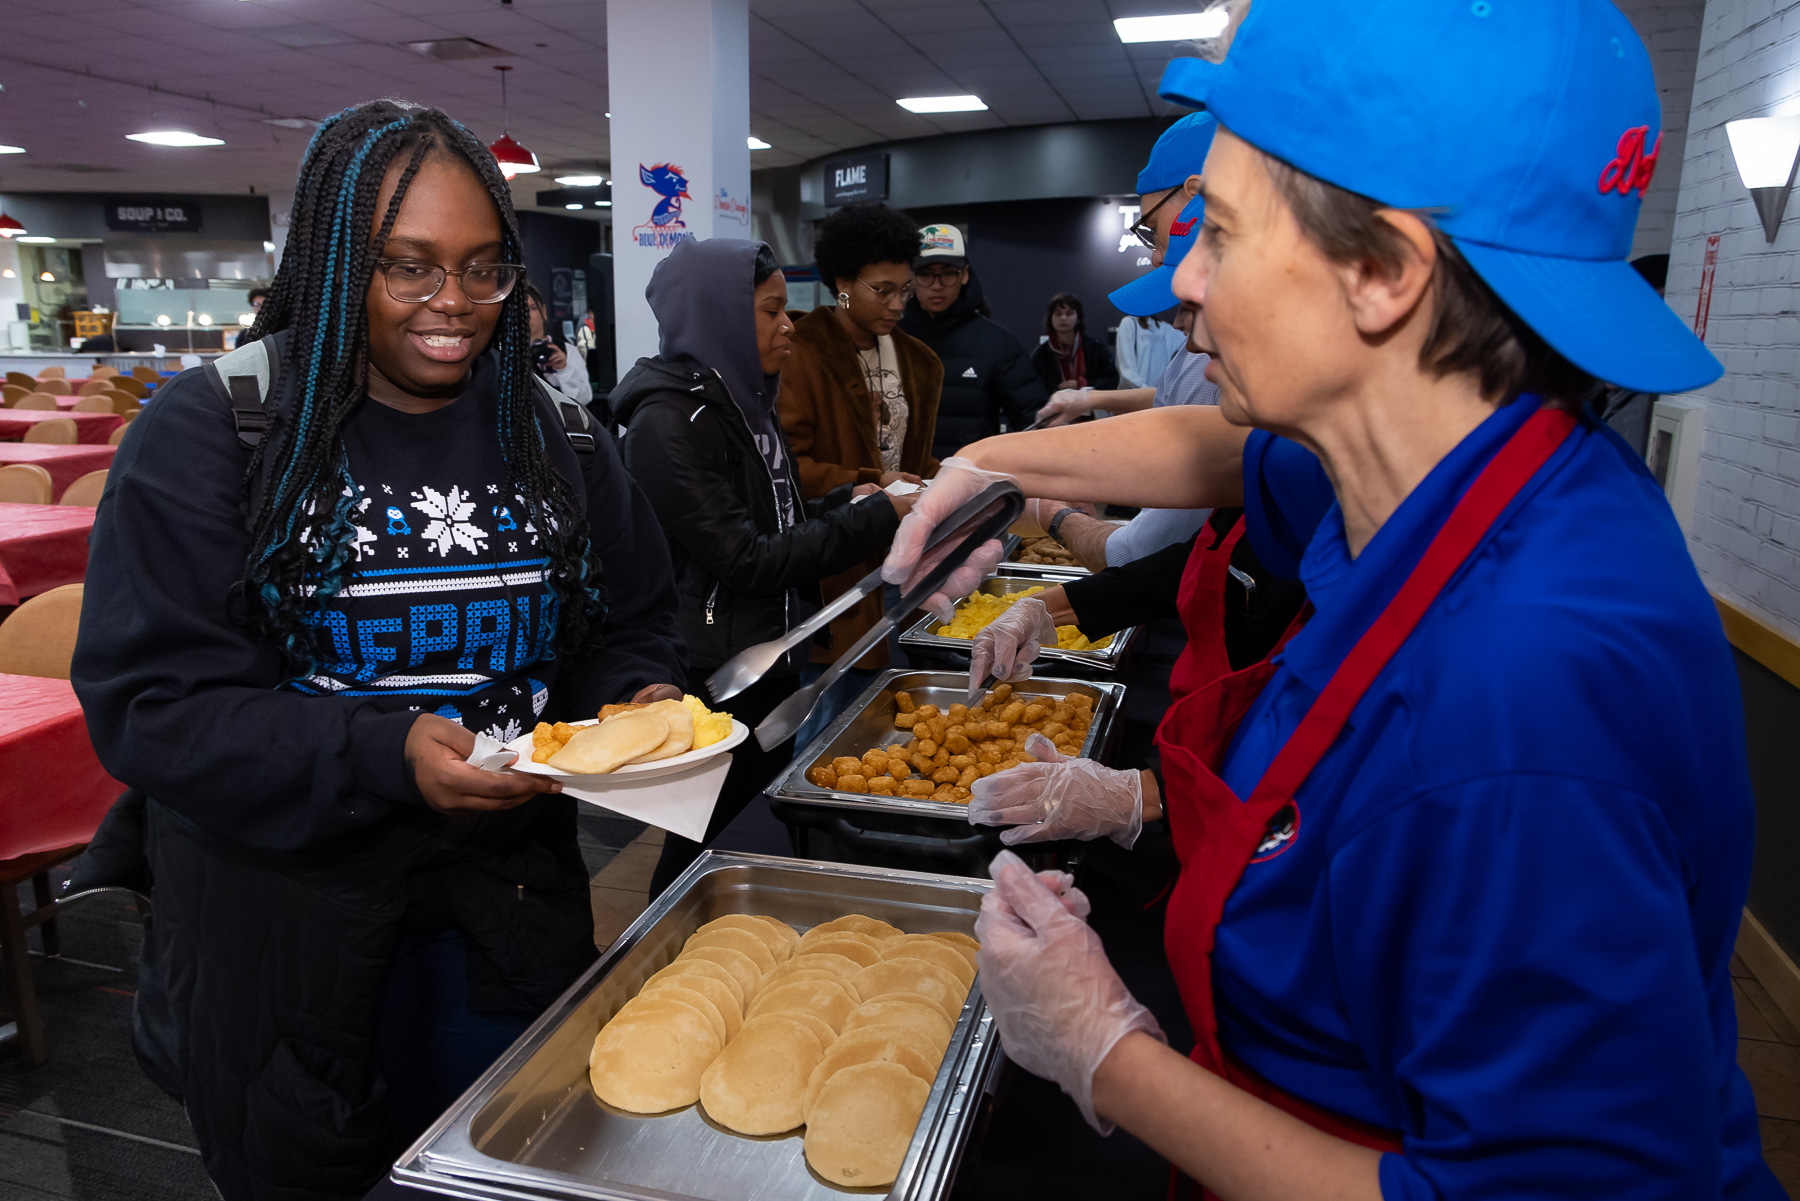 Faculty and staff volunteers dished out a late night breakfast to more than 2000 students in the first hour of the holiday favorite event. (Photo by Jeff Carrion / DePaul University) 